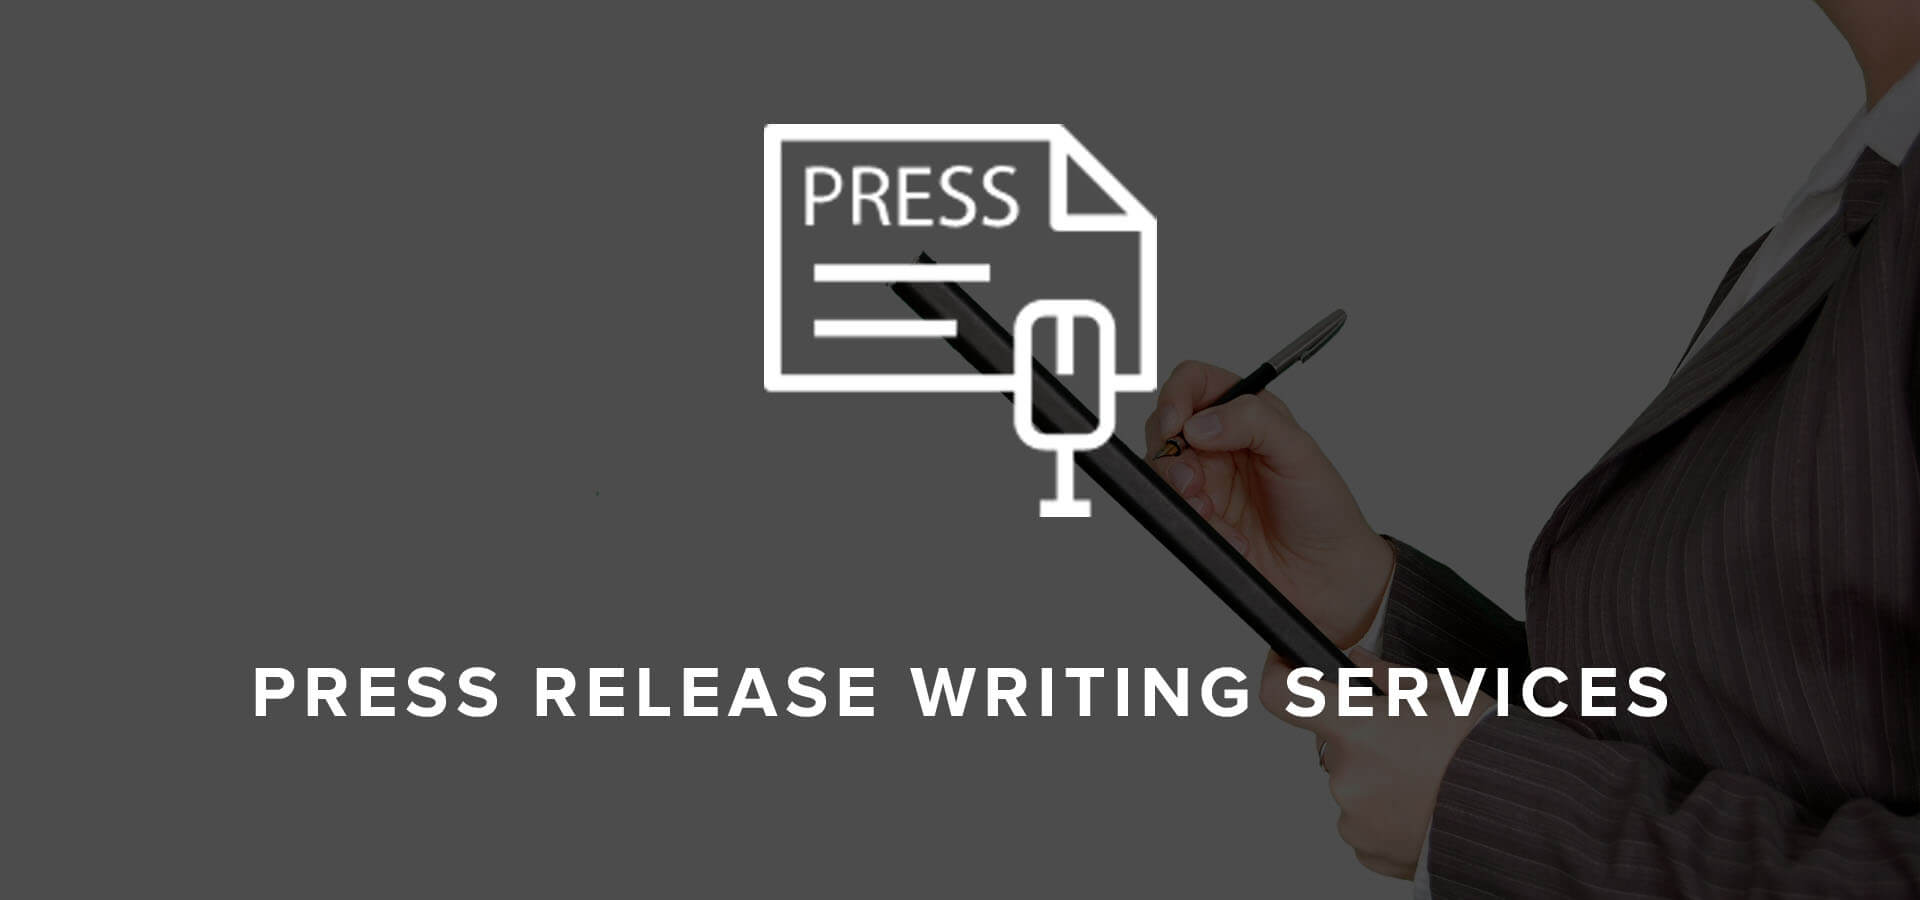 Press release writing service